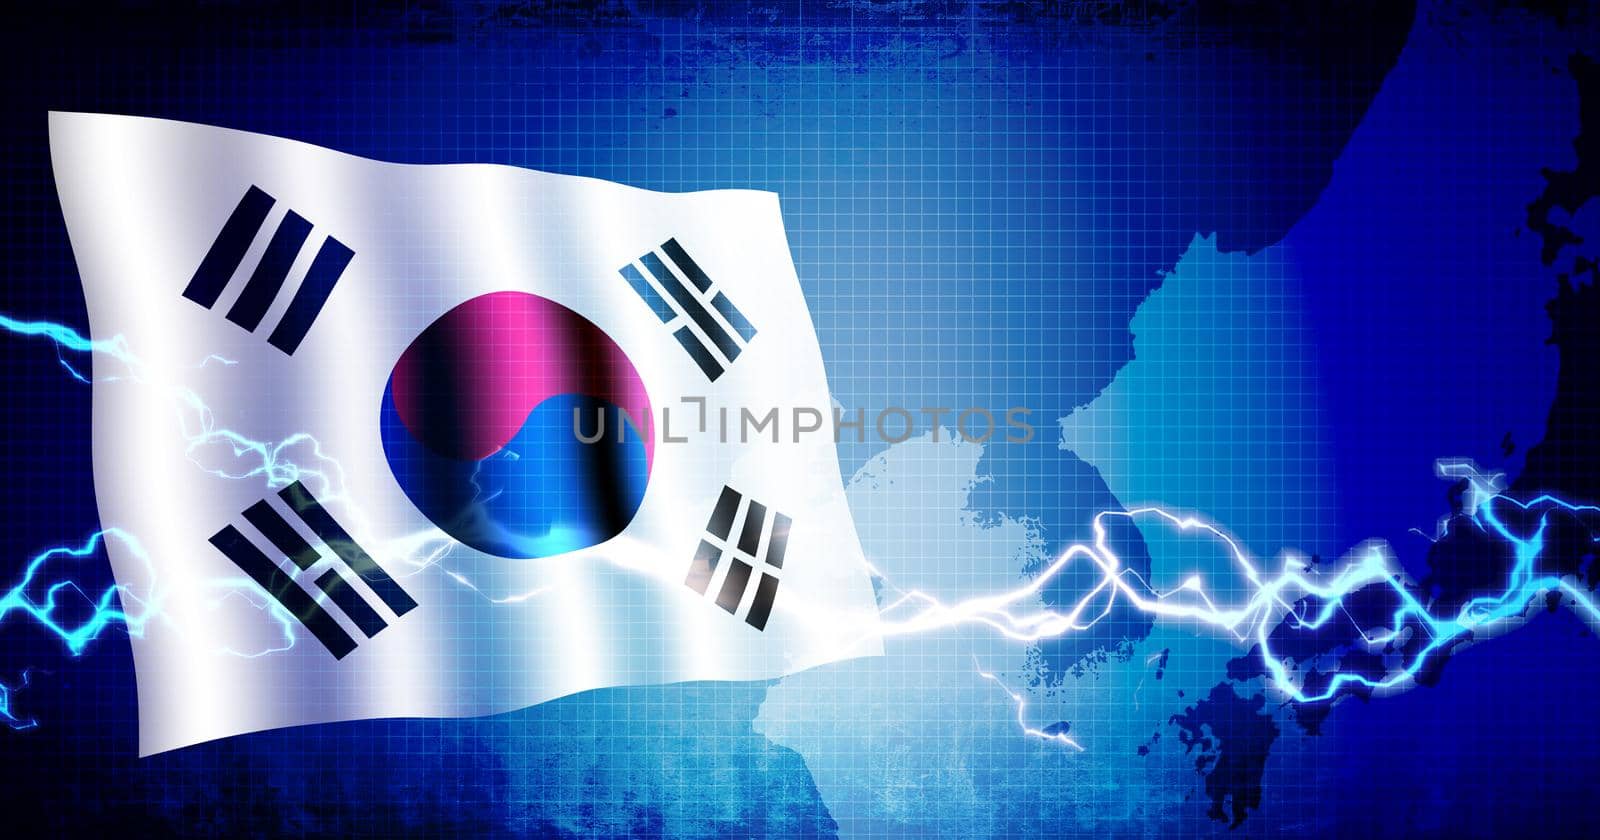 South korea national flag and east asia map / web banner background (text space) by barks